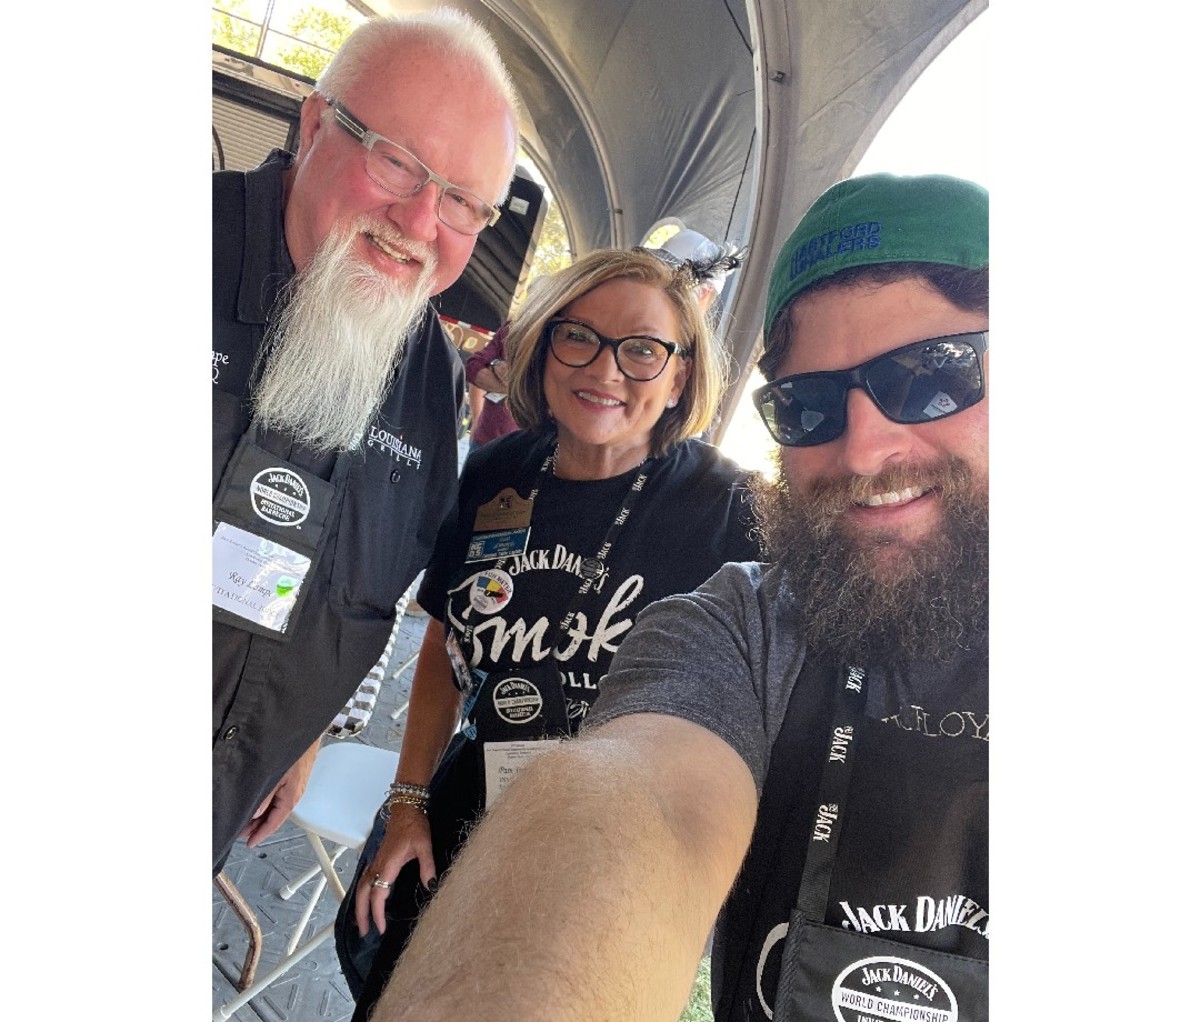 Three judges at the Jack Daniel's BBQ competition.